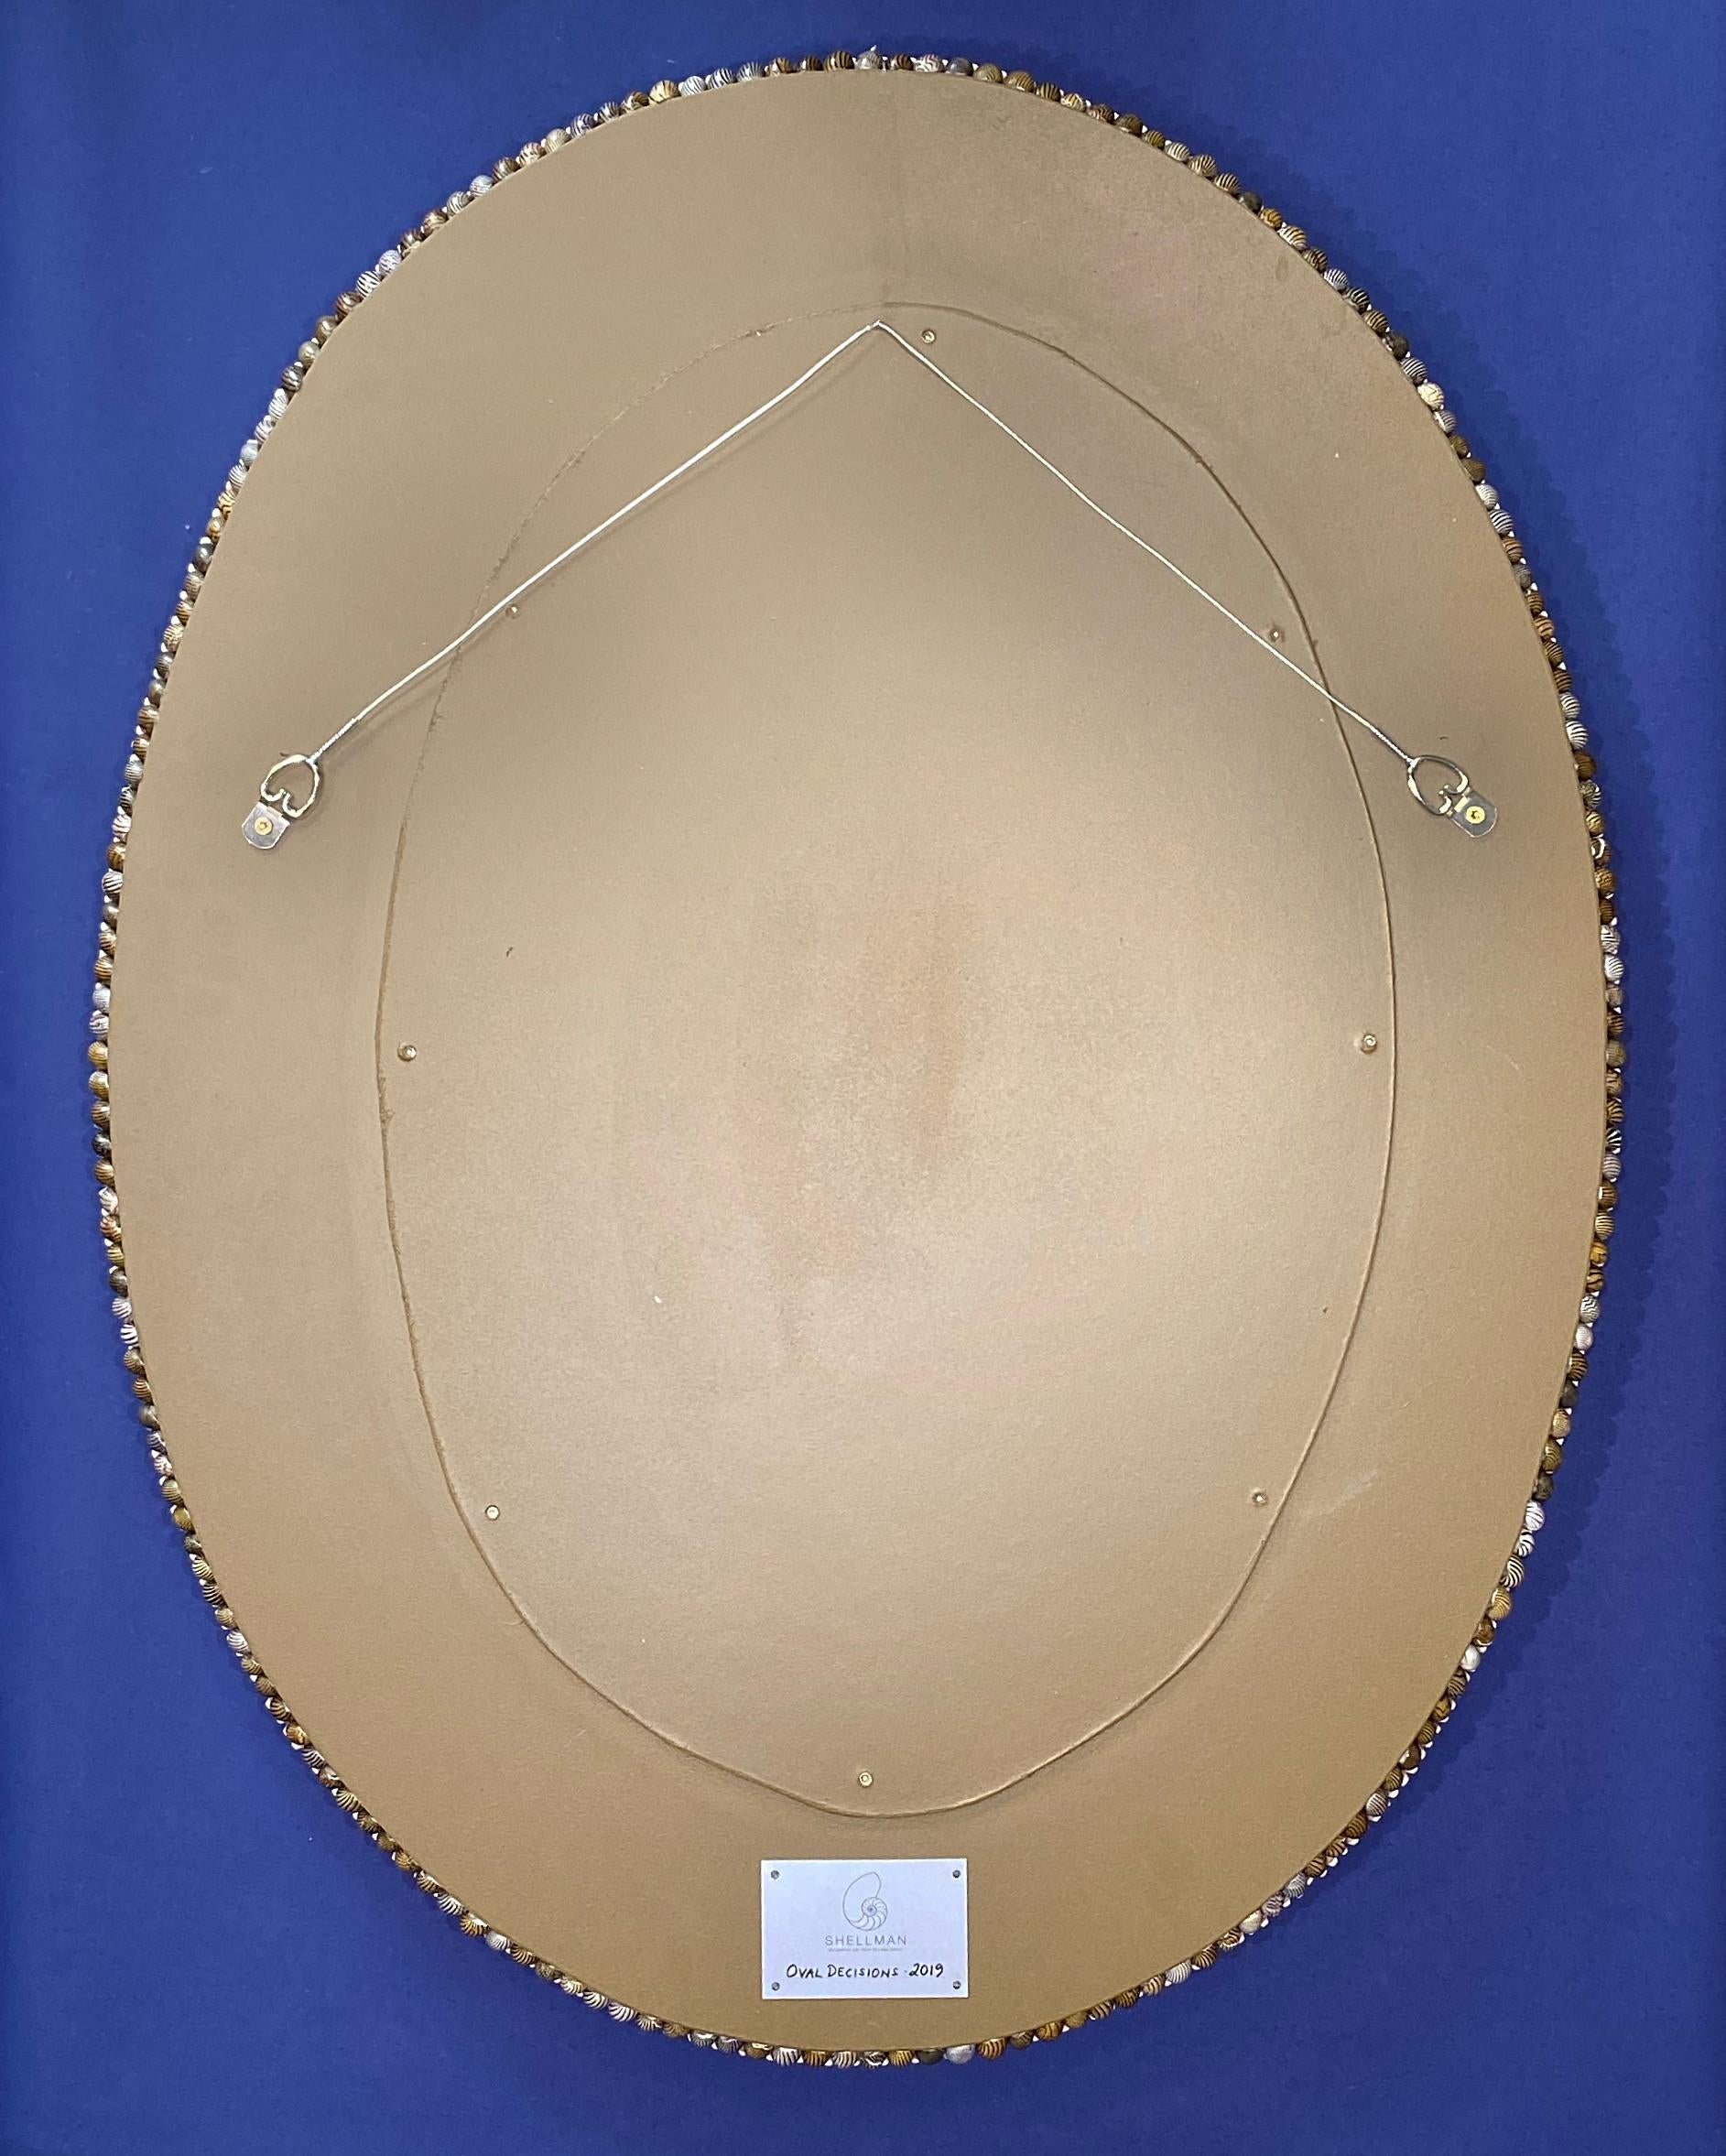 Oval Decisions, Unique Shell Mirror by Shellman Scandinavia In Excellent Condition For Sale In Helsingborg, SE